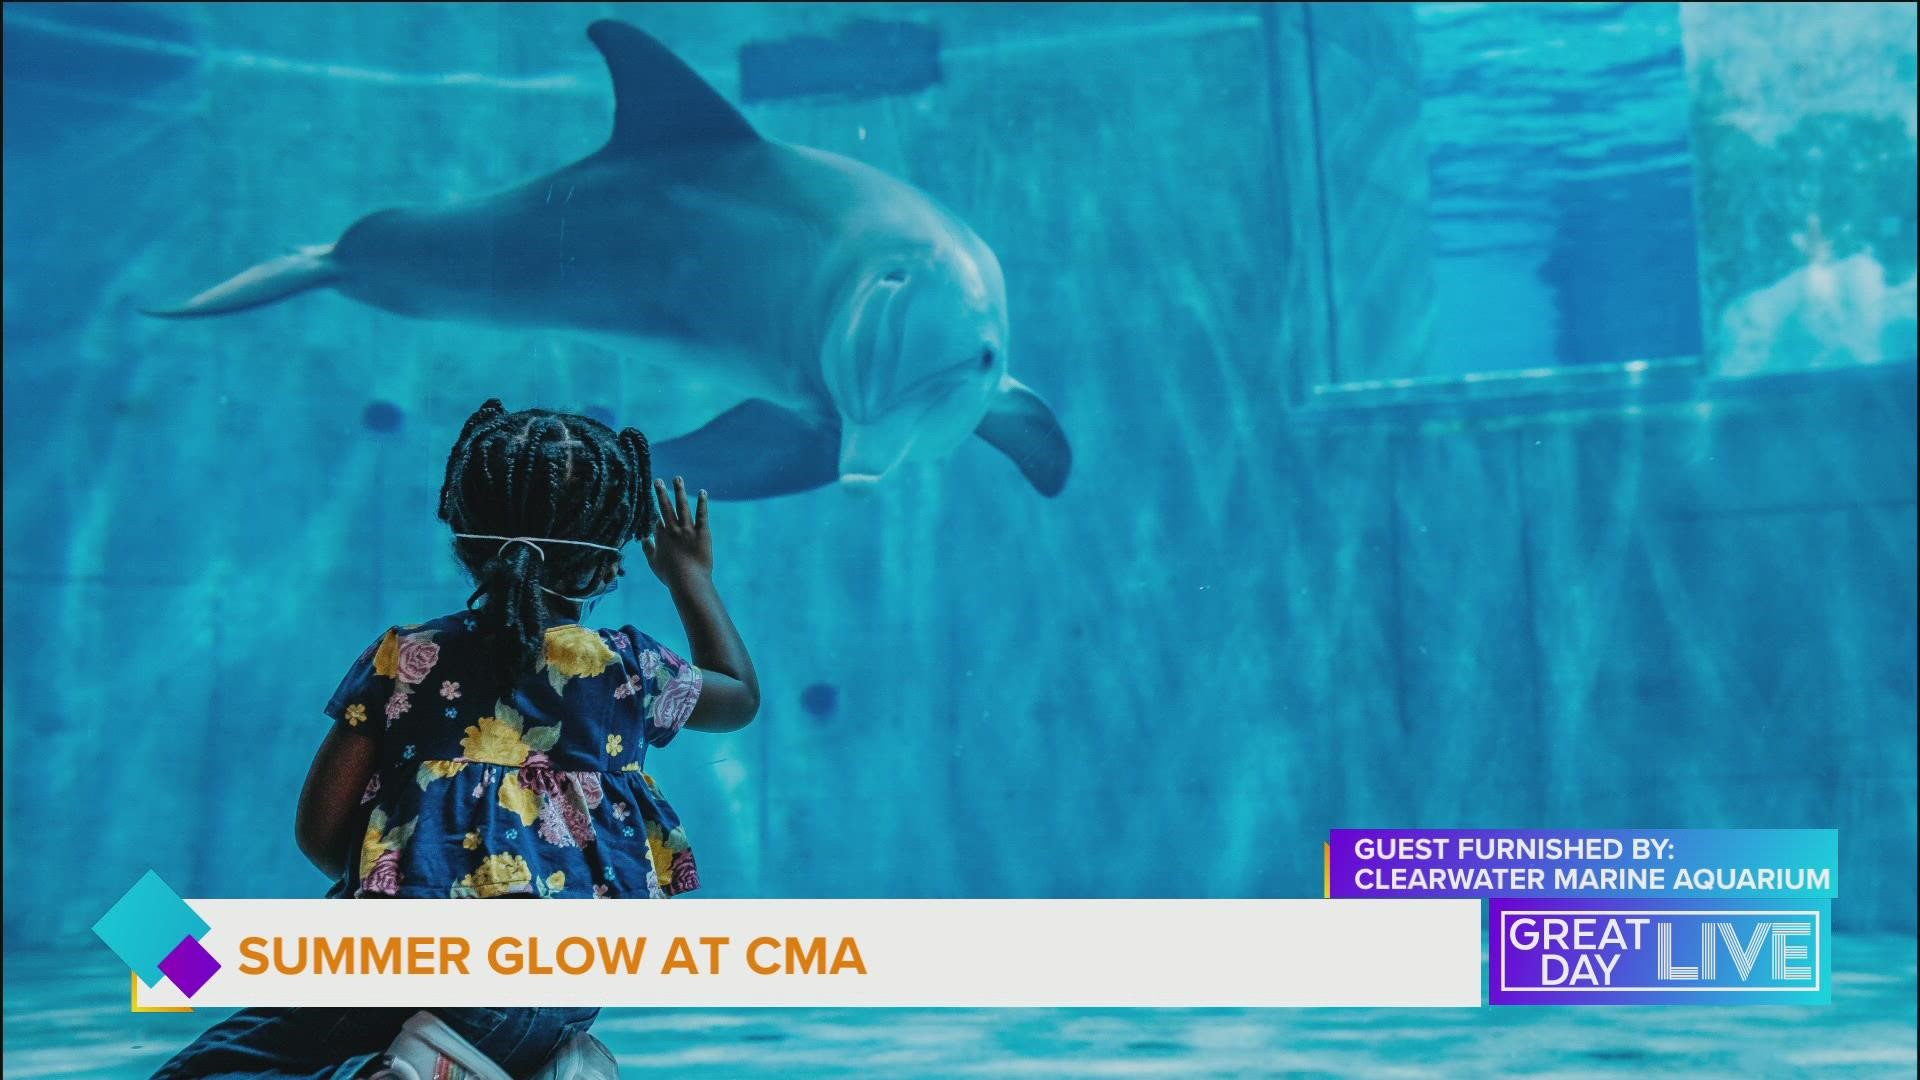 Here’s what’s new at the Clearwater Marine Aquarium